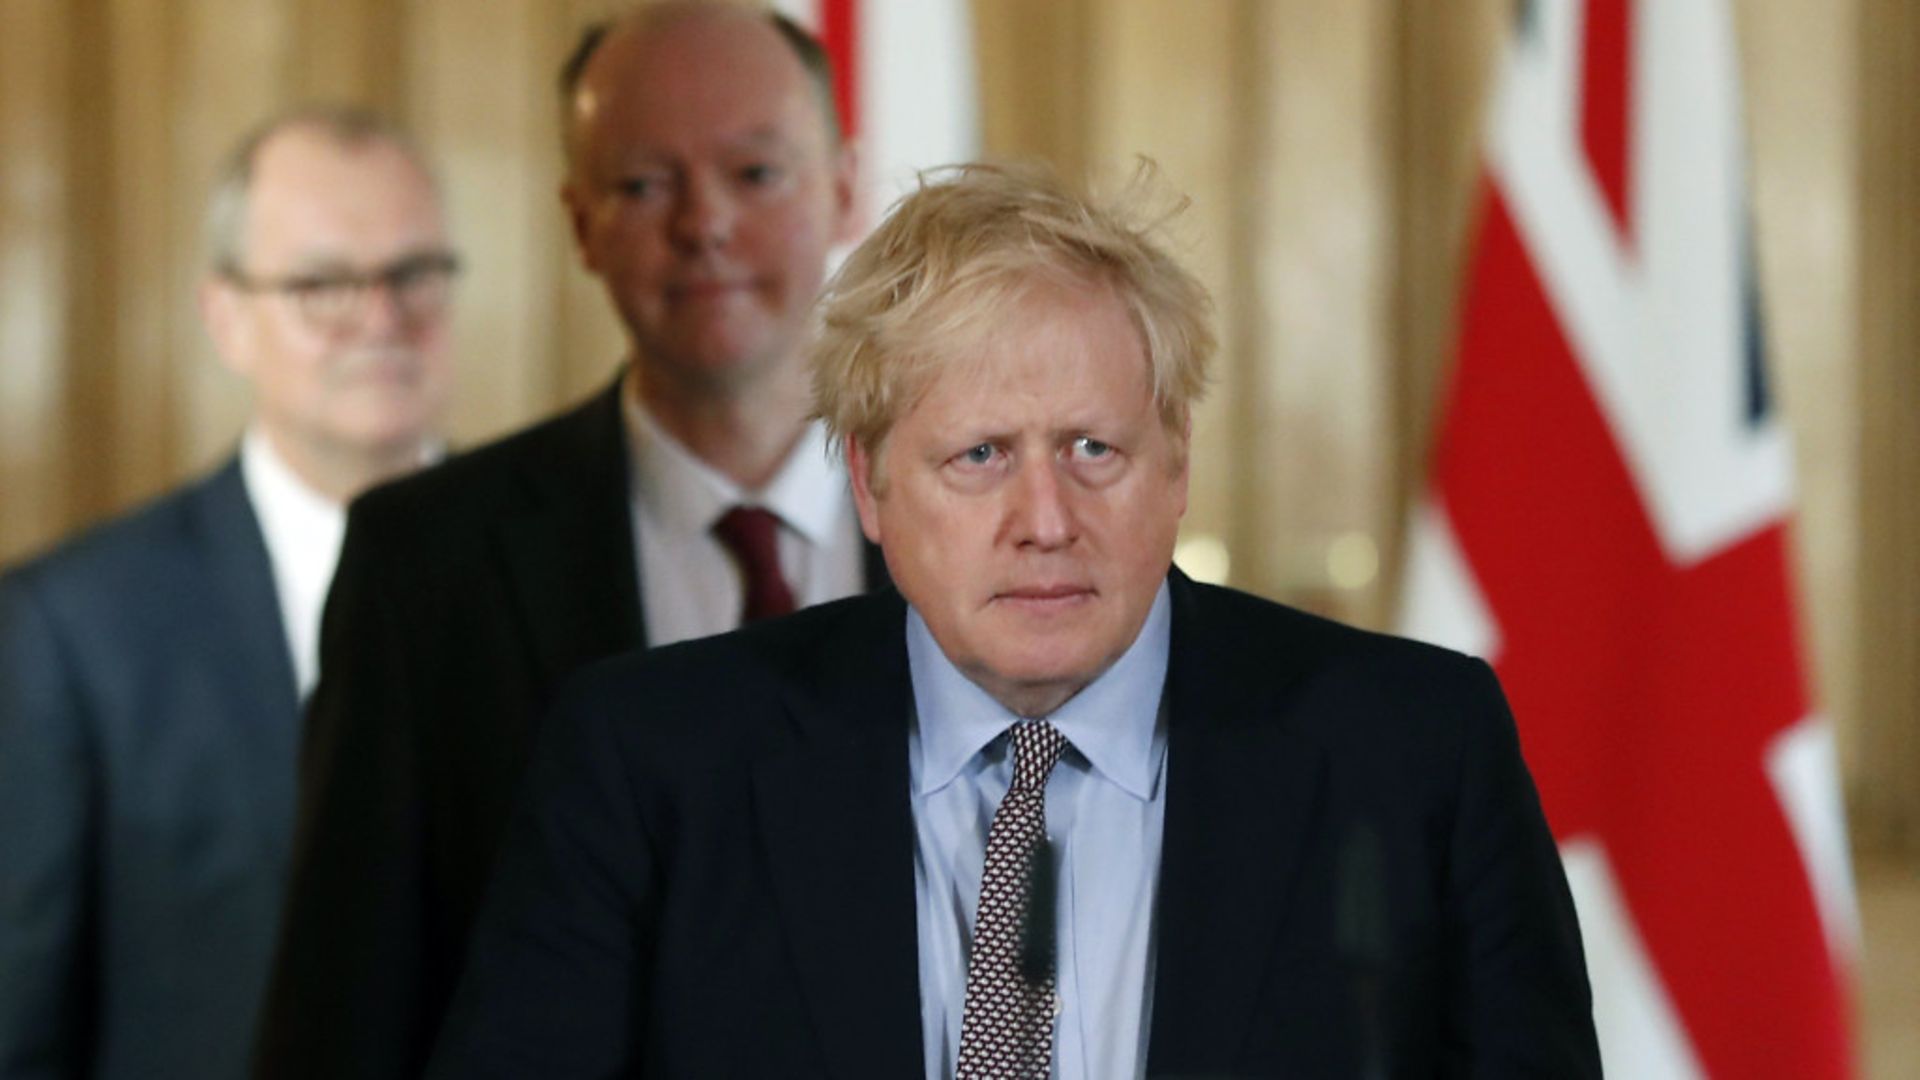 Prime Minister Boris Johnson arrives for a press conference with Chief Medical Officer for England Chris Whitty, (centre), and Chief Scientific Adviser Sir Patrick Vallance - Credit: PA